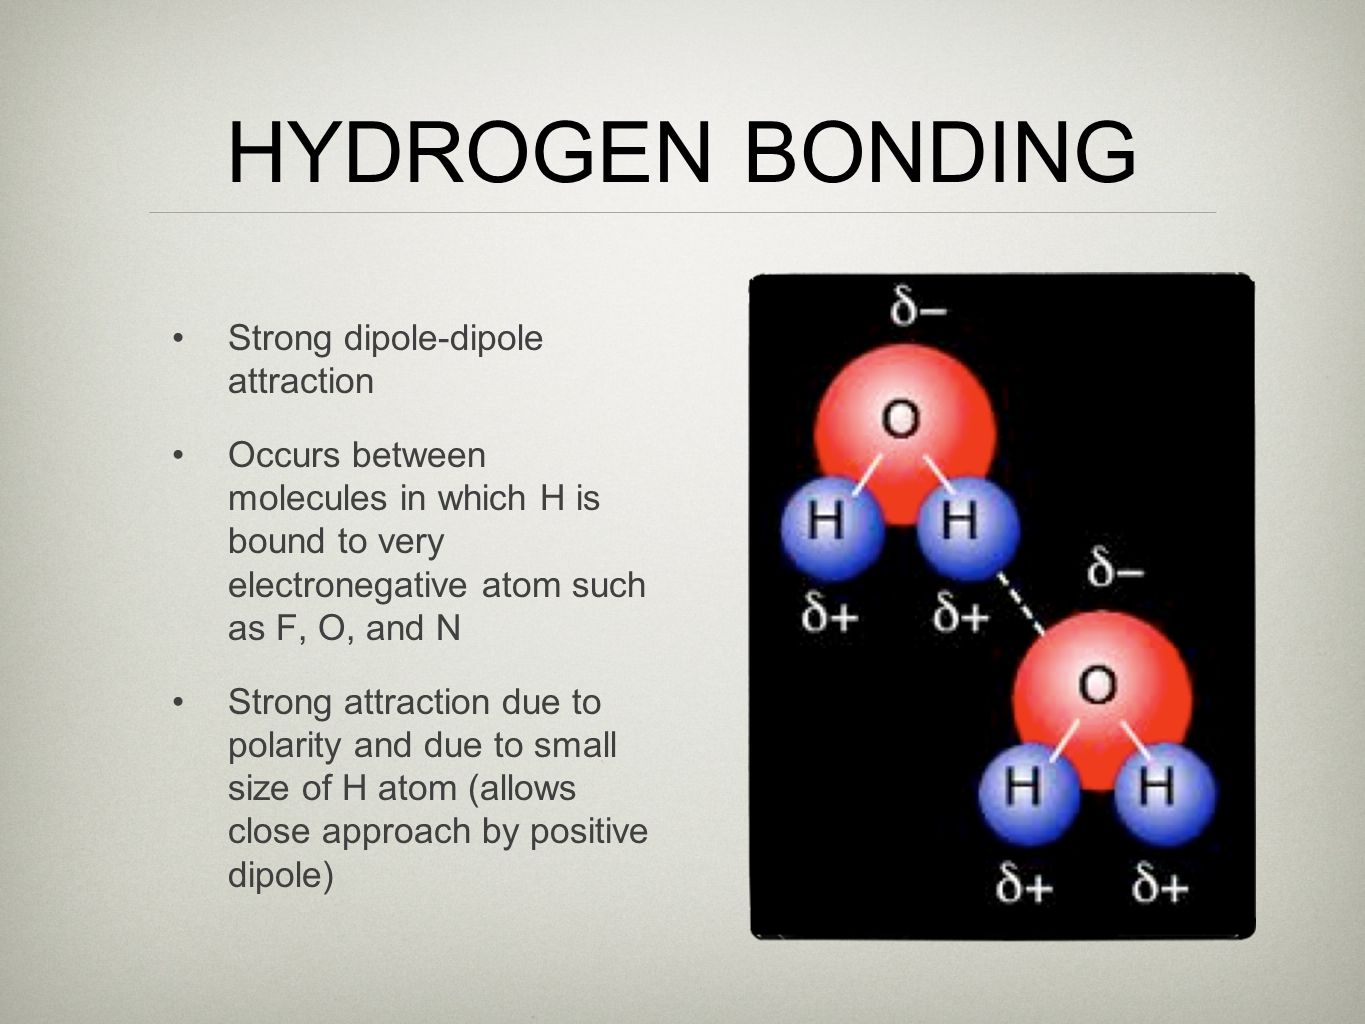 HYDROGEN BONDING Strong dipole-dipole attraction Occurs between molecules in which H is bound to very electronegative atom such as F, O, and N Strong attraction due to polarity and due to small size of H atom (allows close approach by positive dipole)